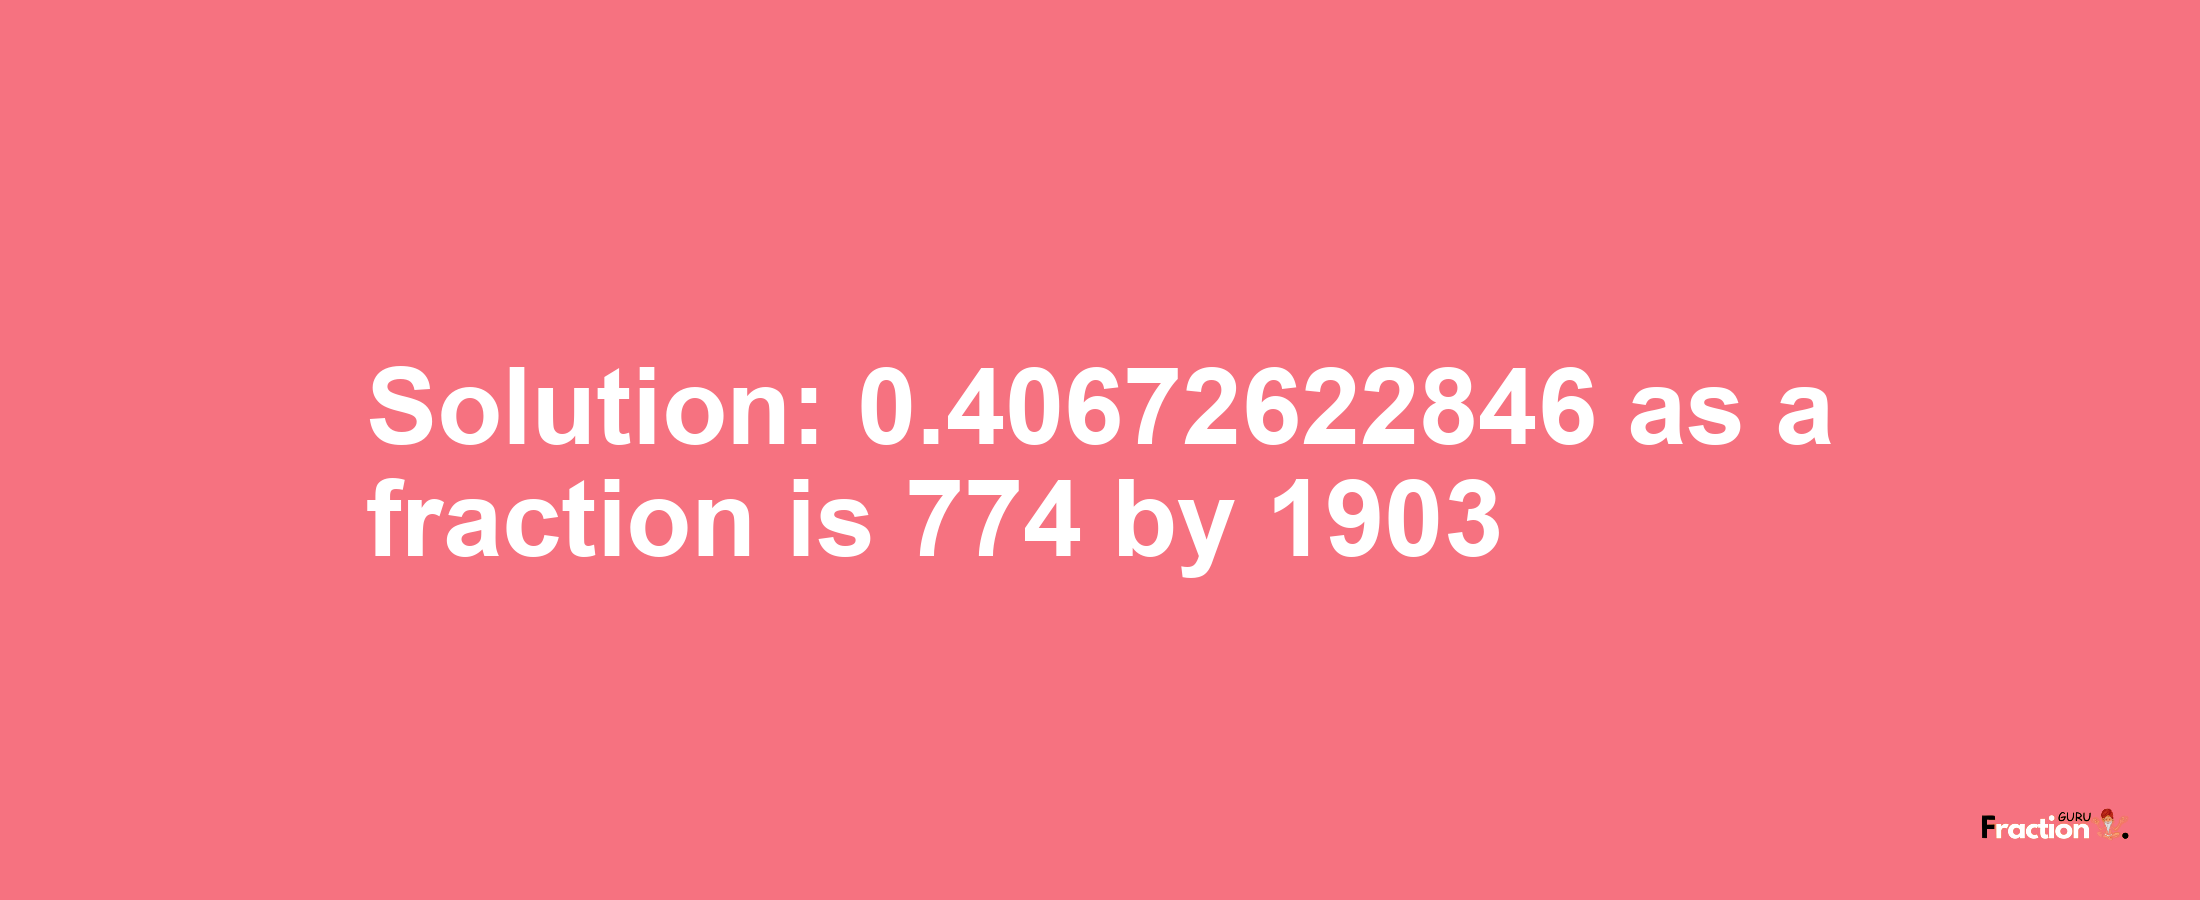 Solution:0.40672622846 as a fraction is 774/1903